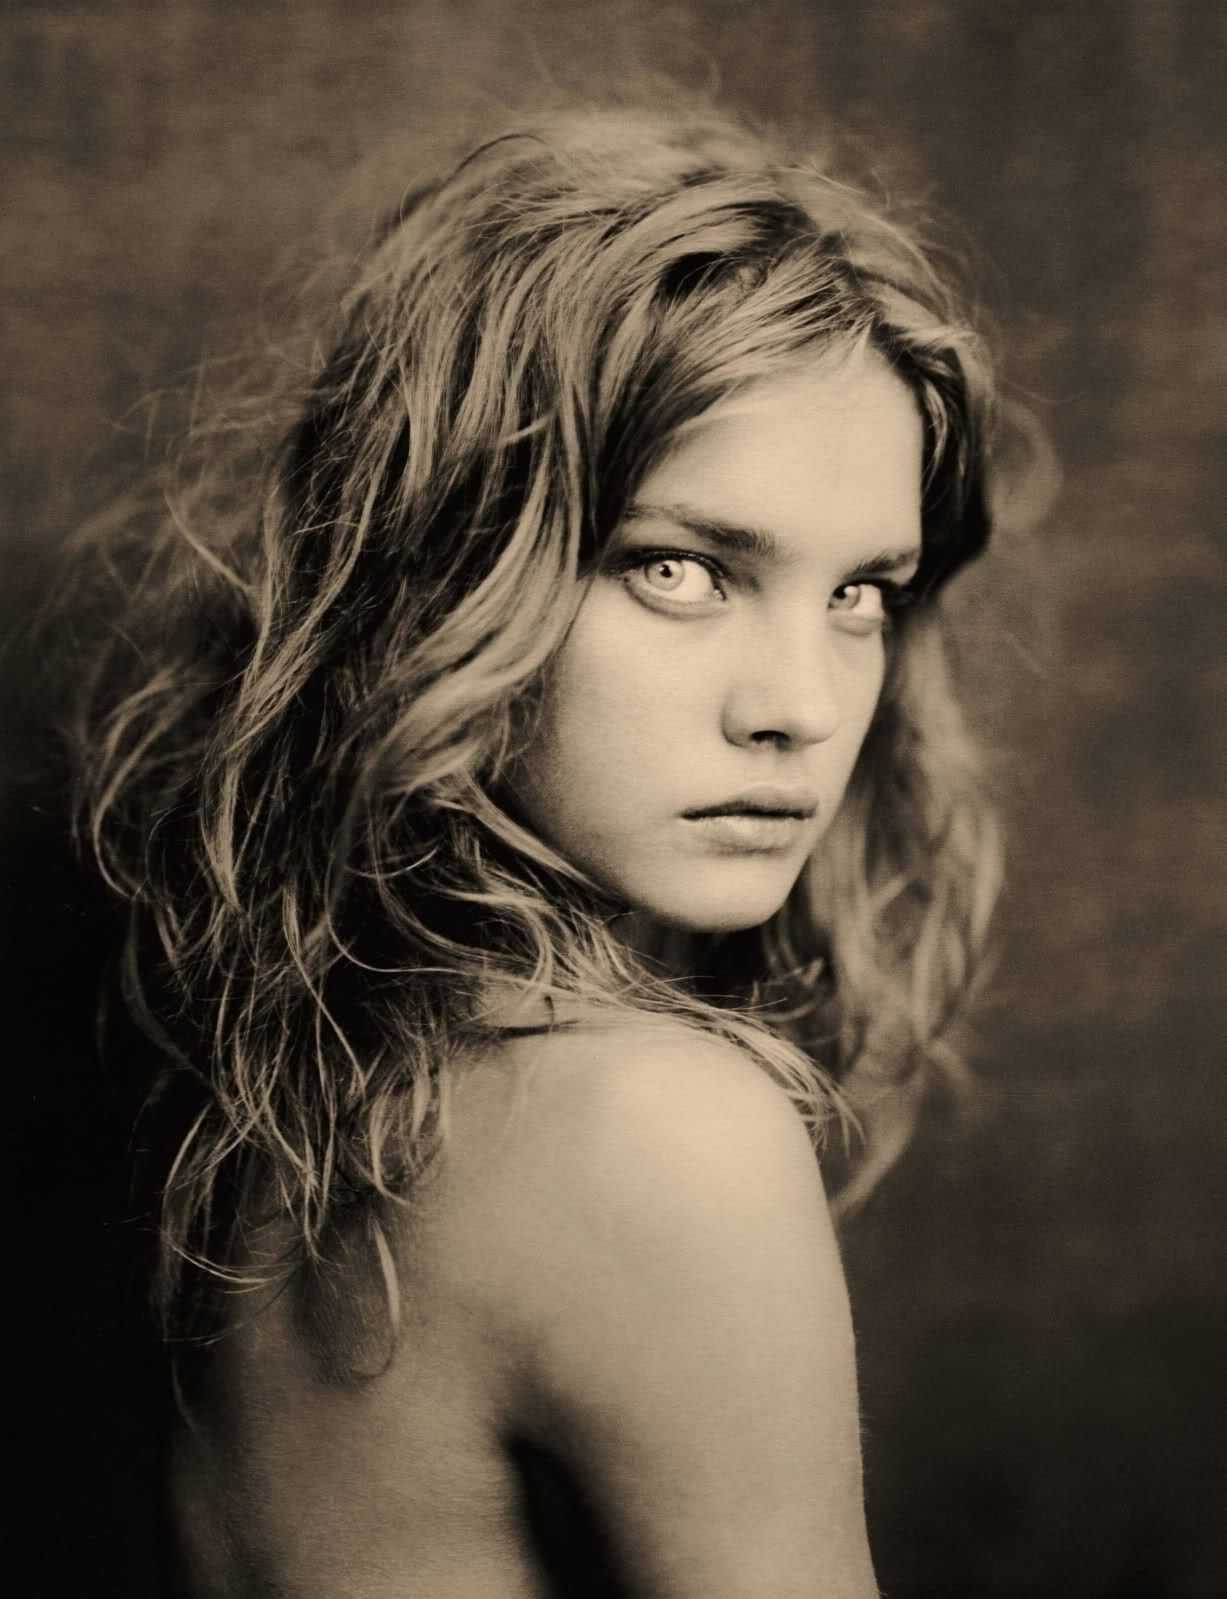 Paolo Roversi. Fire in the eyes!